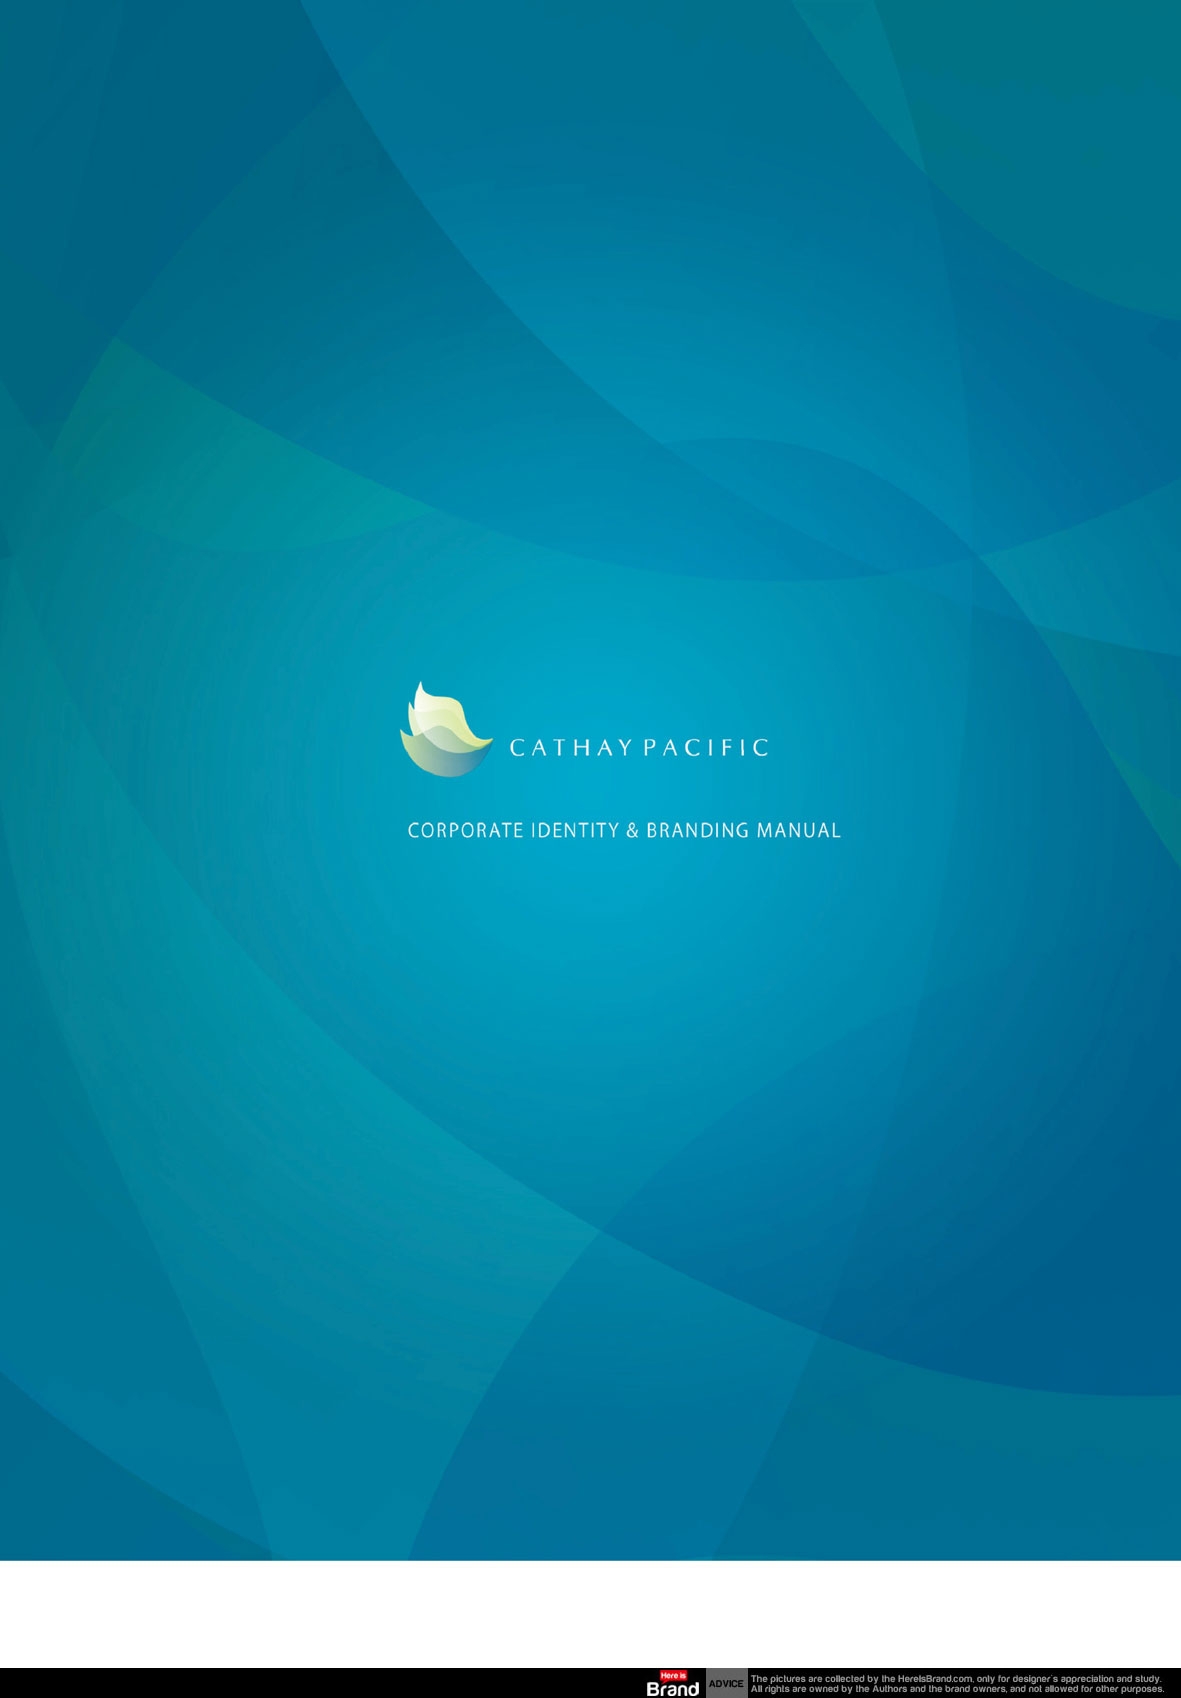 Cathay Pacific corporate identity and branding manual